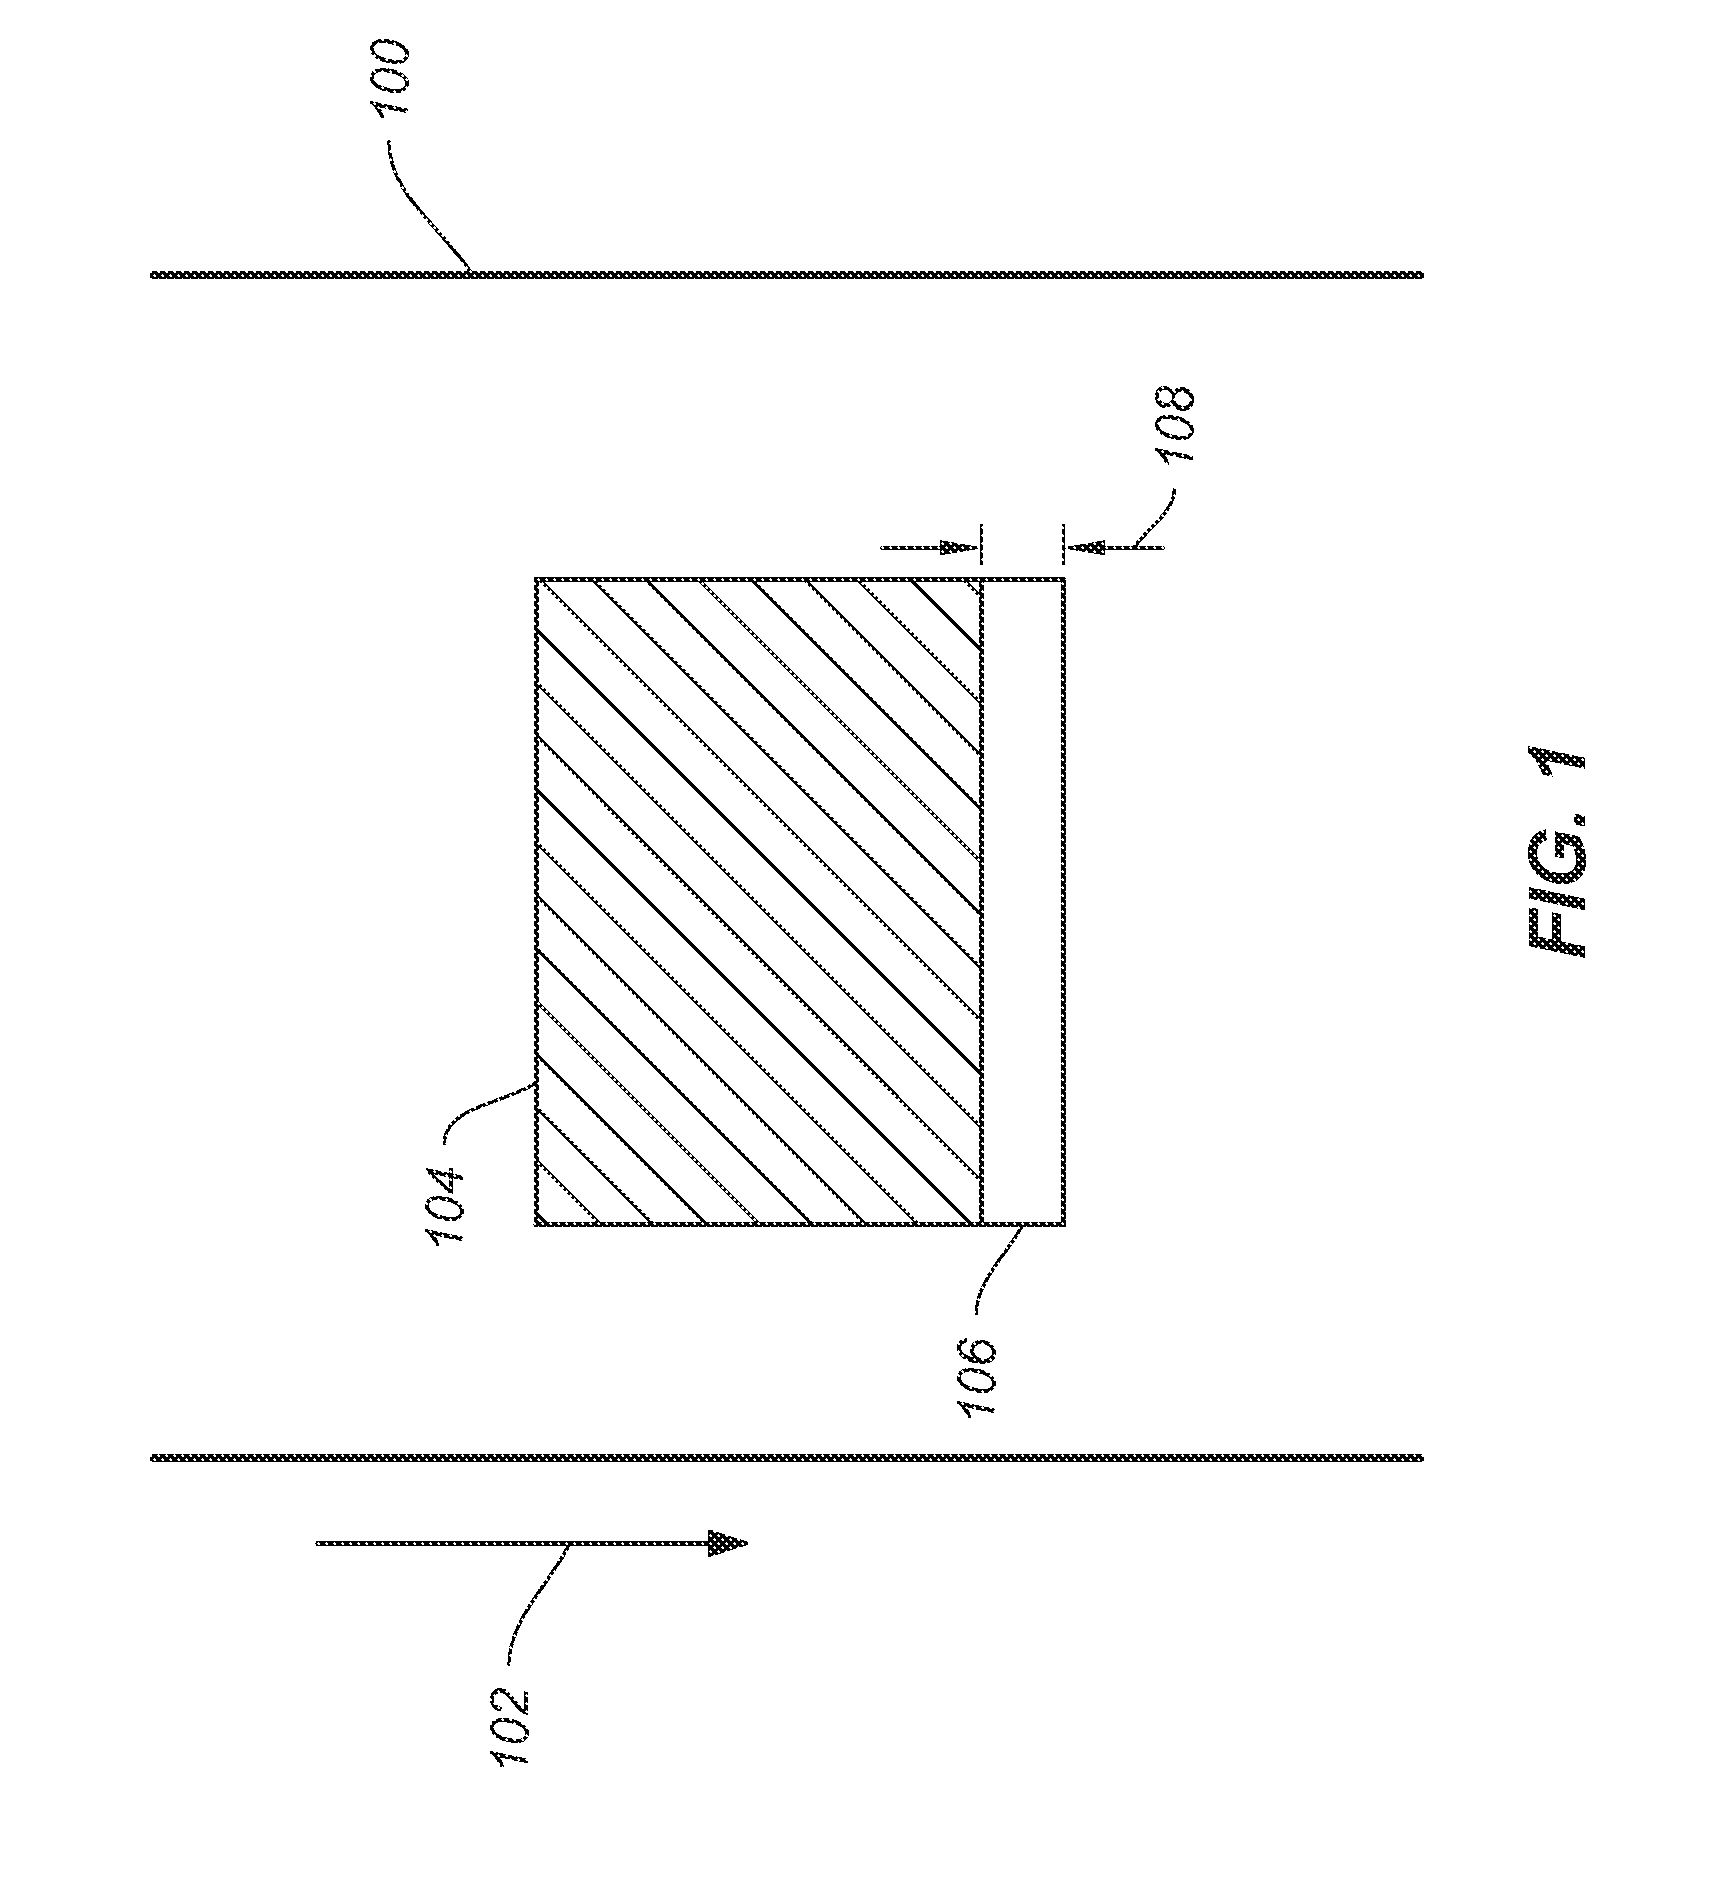 Method for controlling tension in a web